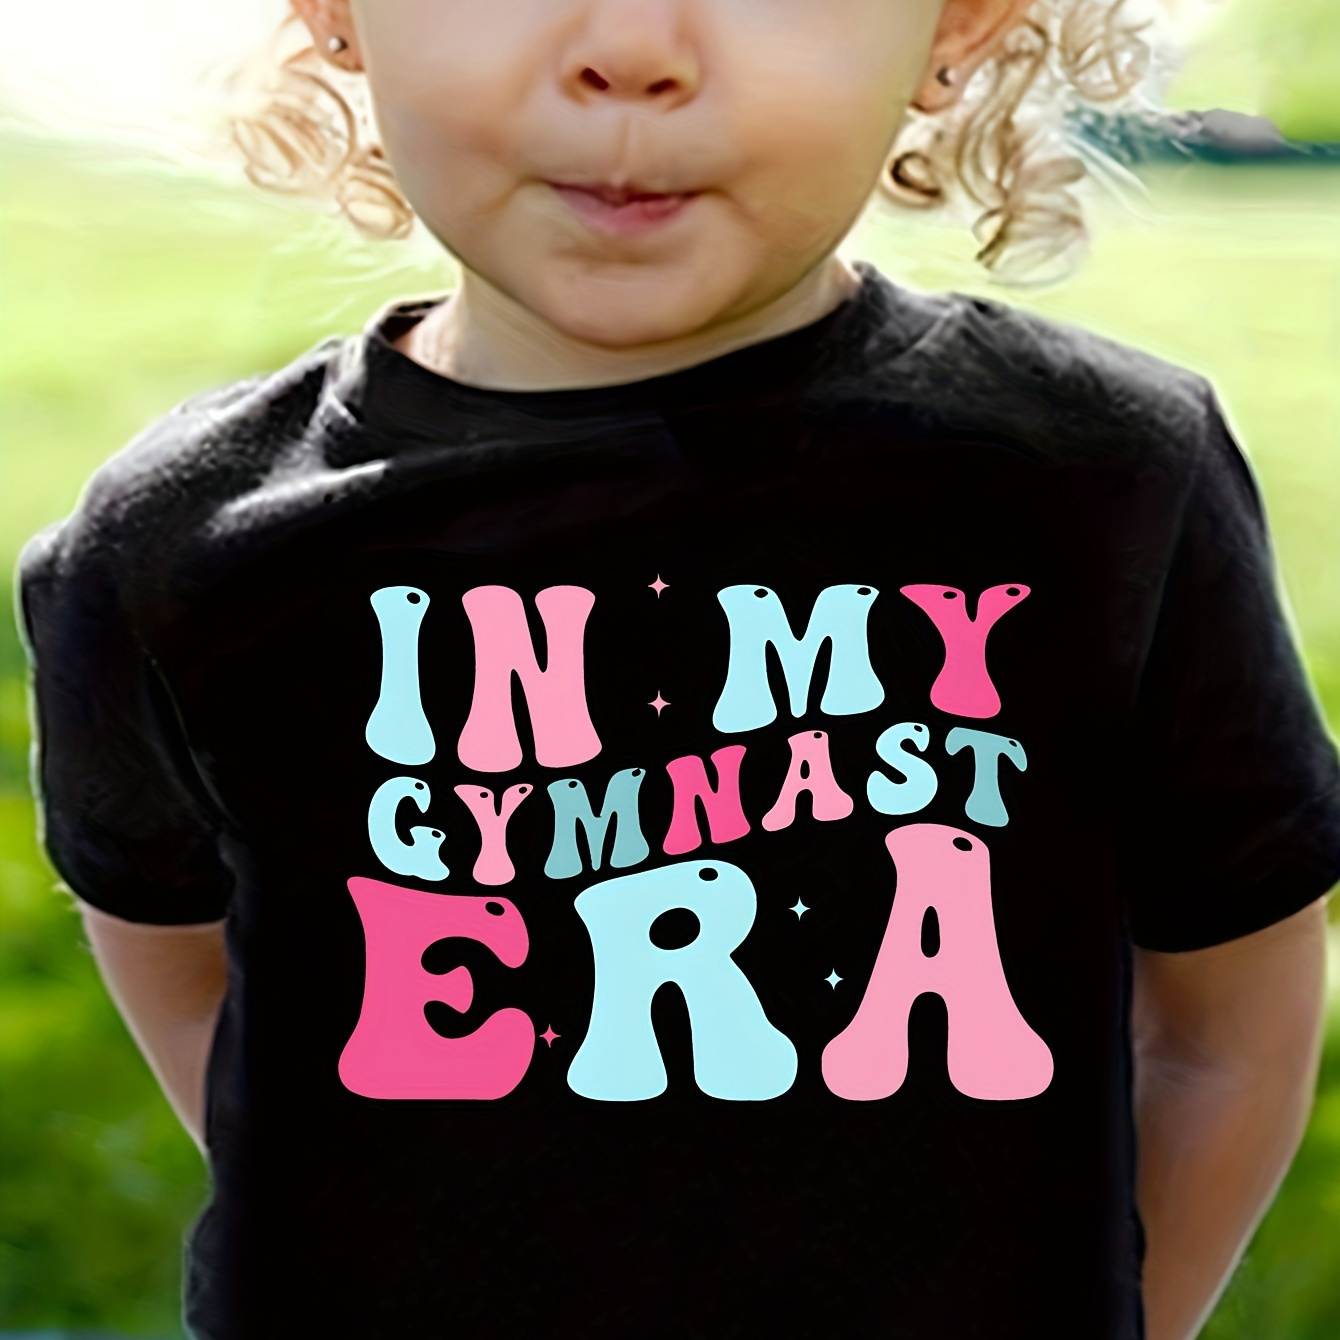 

In My Gymnast Era Graphic Print Creative T-shirts For Girl, Soft & Elastic Comfy Crew Neck Short Sleeve Tee, Kid's Summer Tops